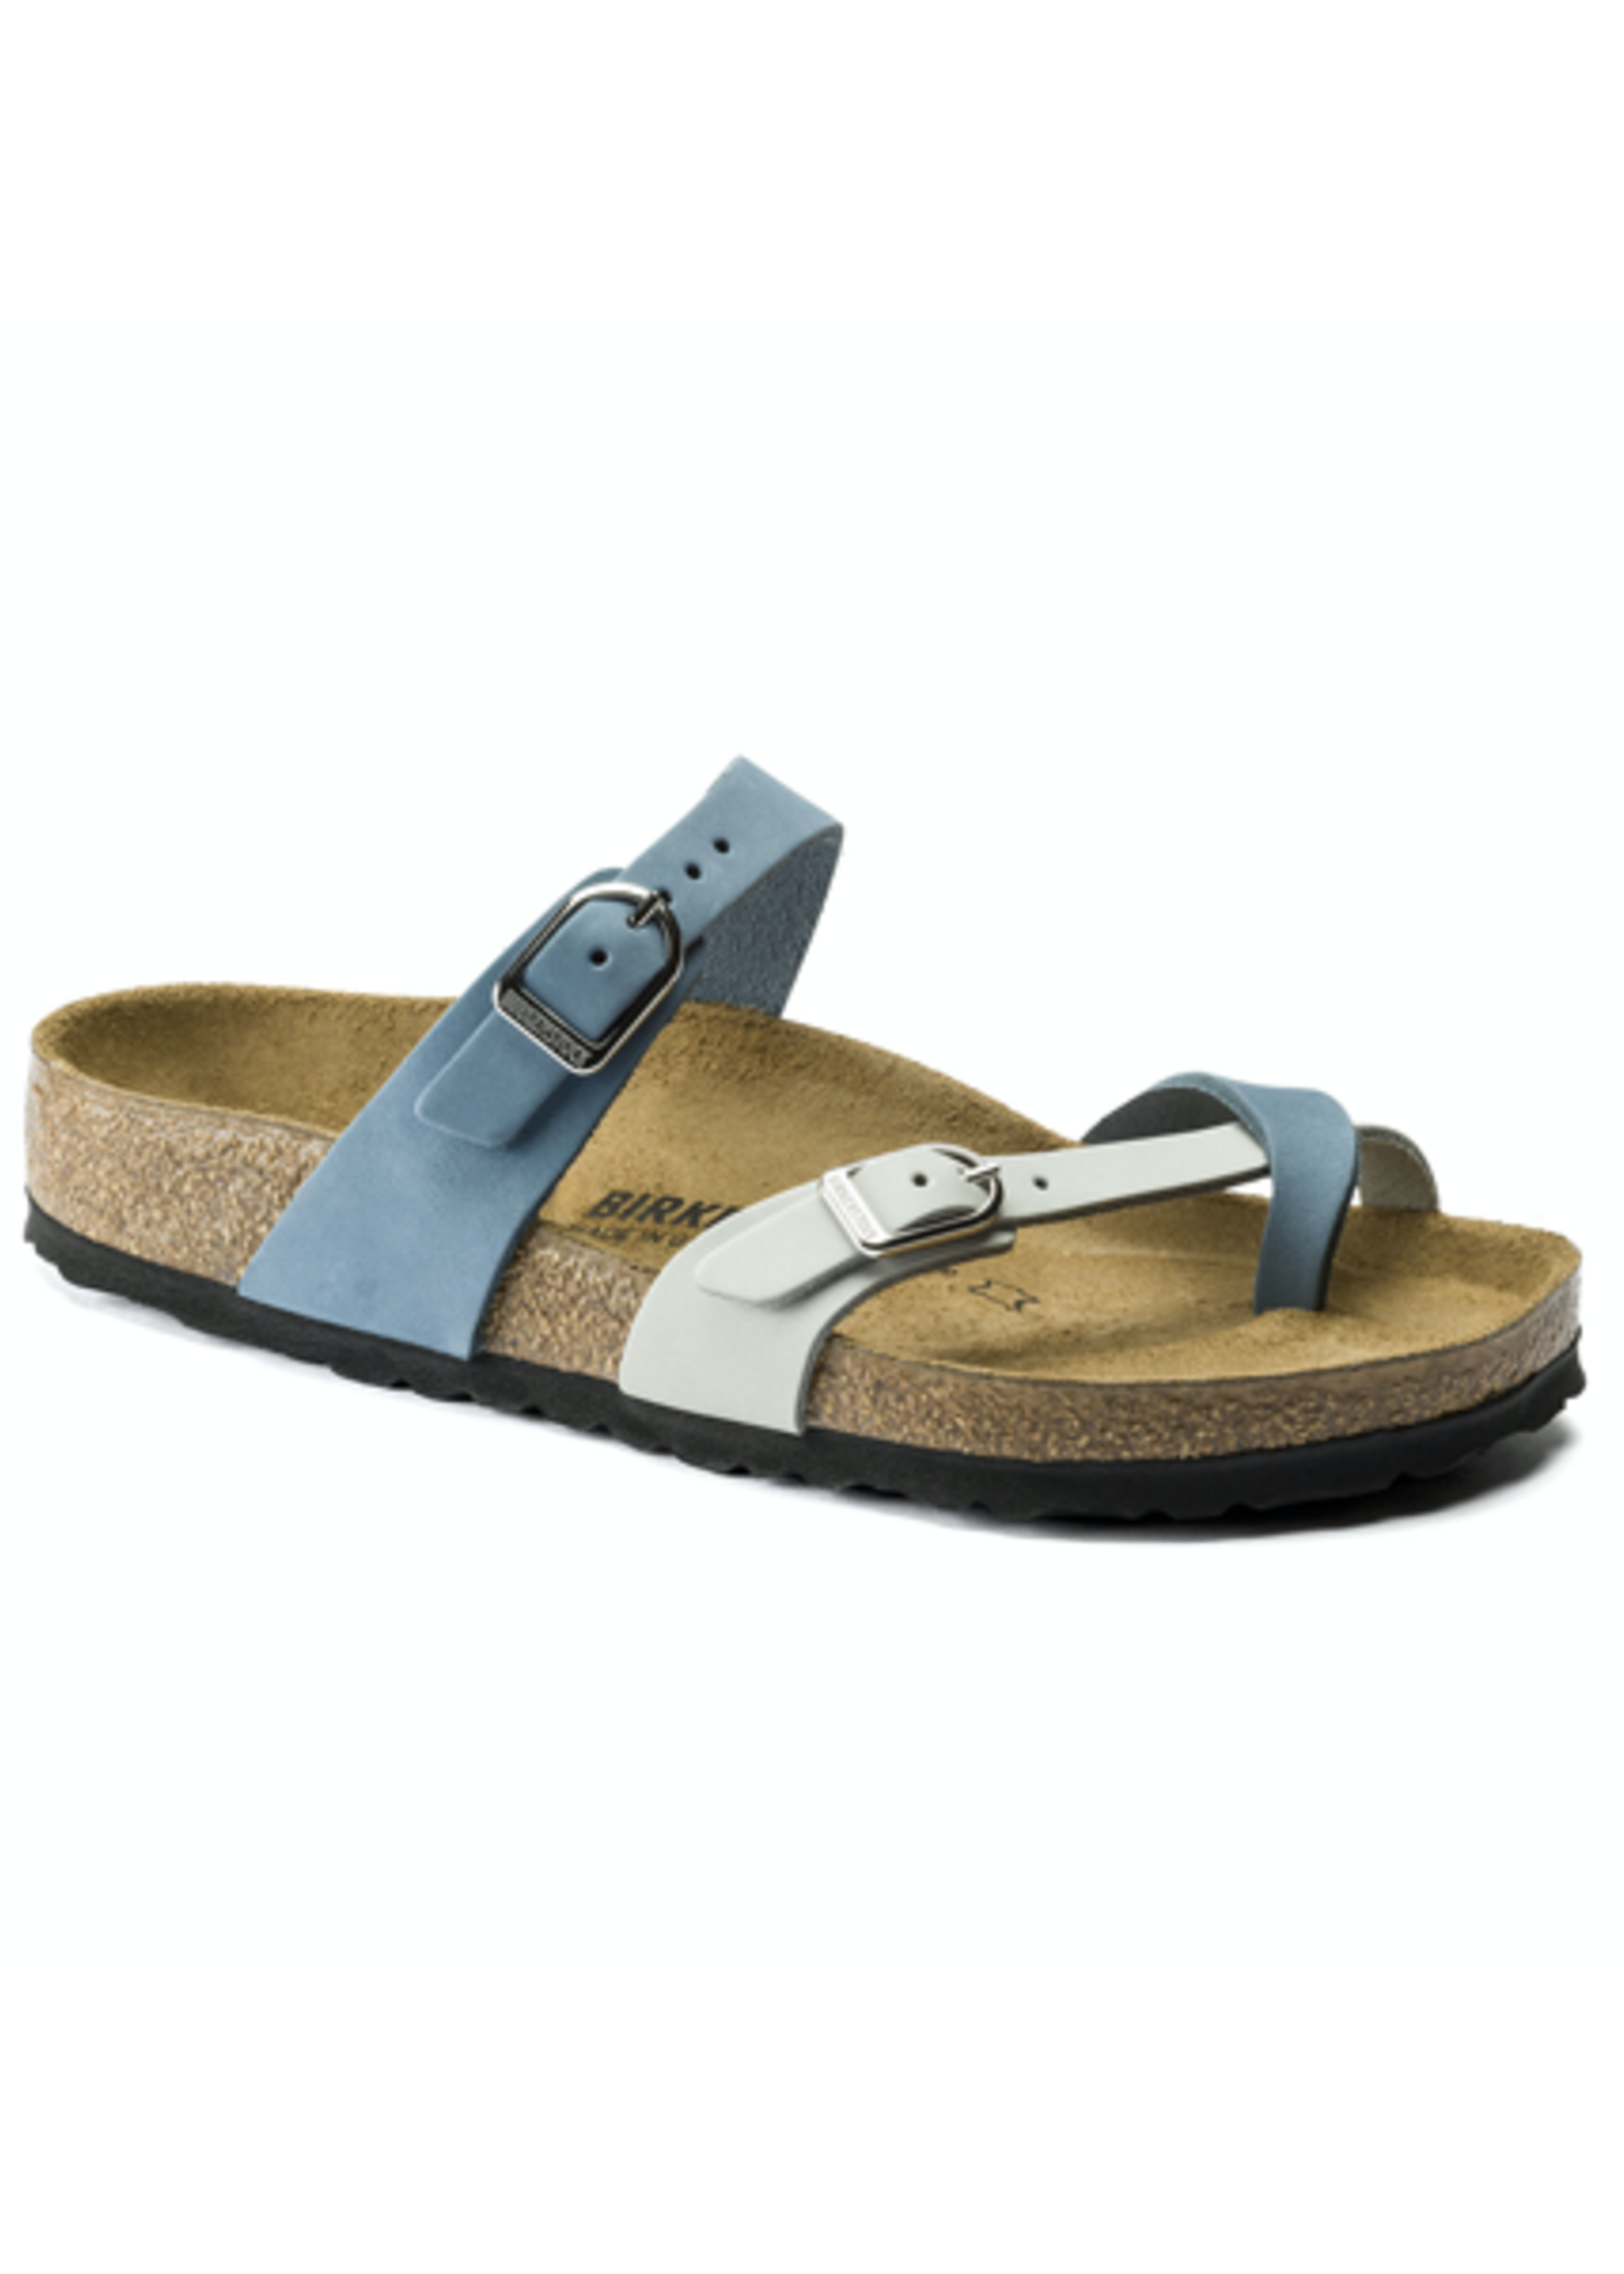 Birkenstock Mayari - Natural Leather in Dove Blue Mineral   (Classic Footbed - Suede Lined)